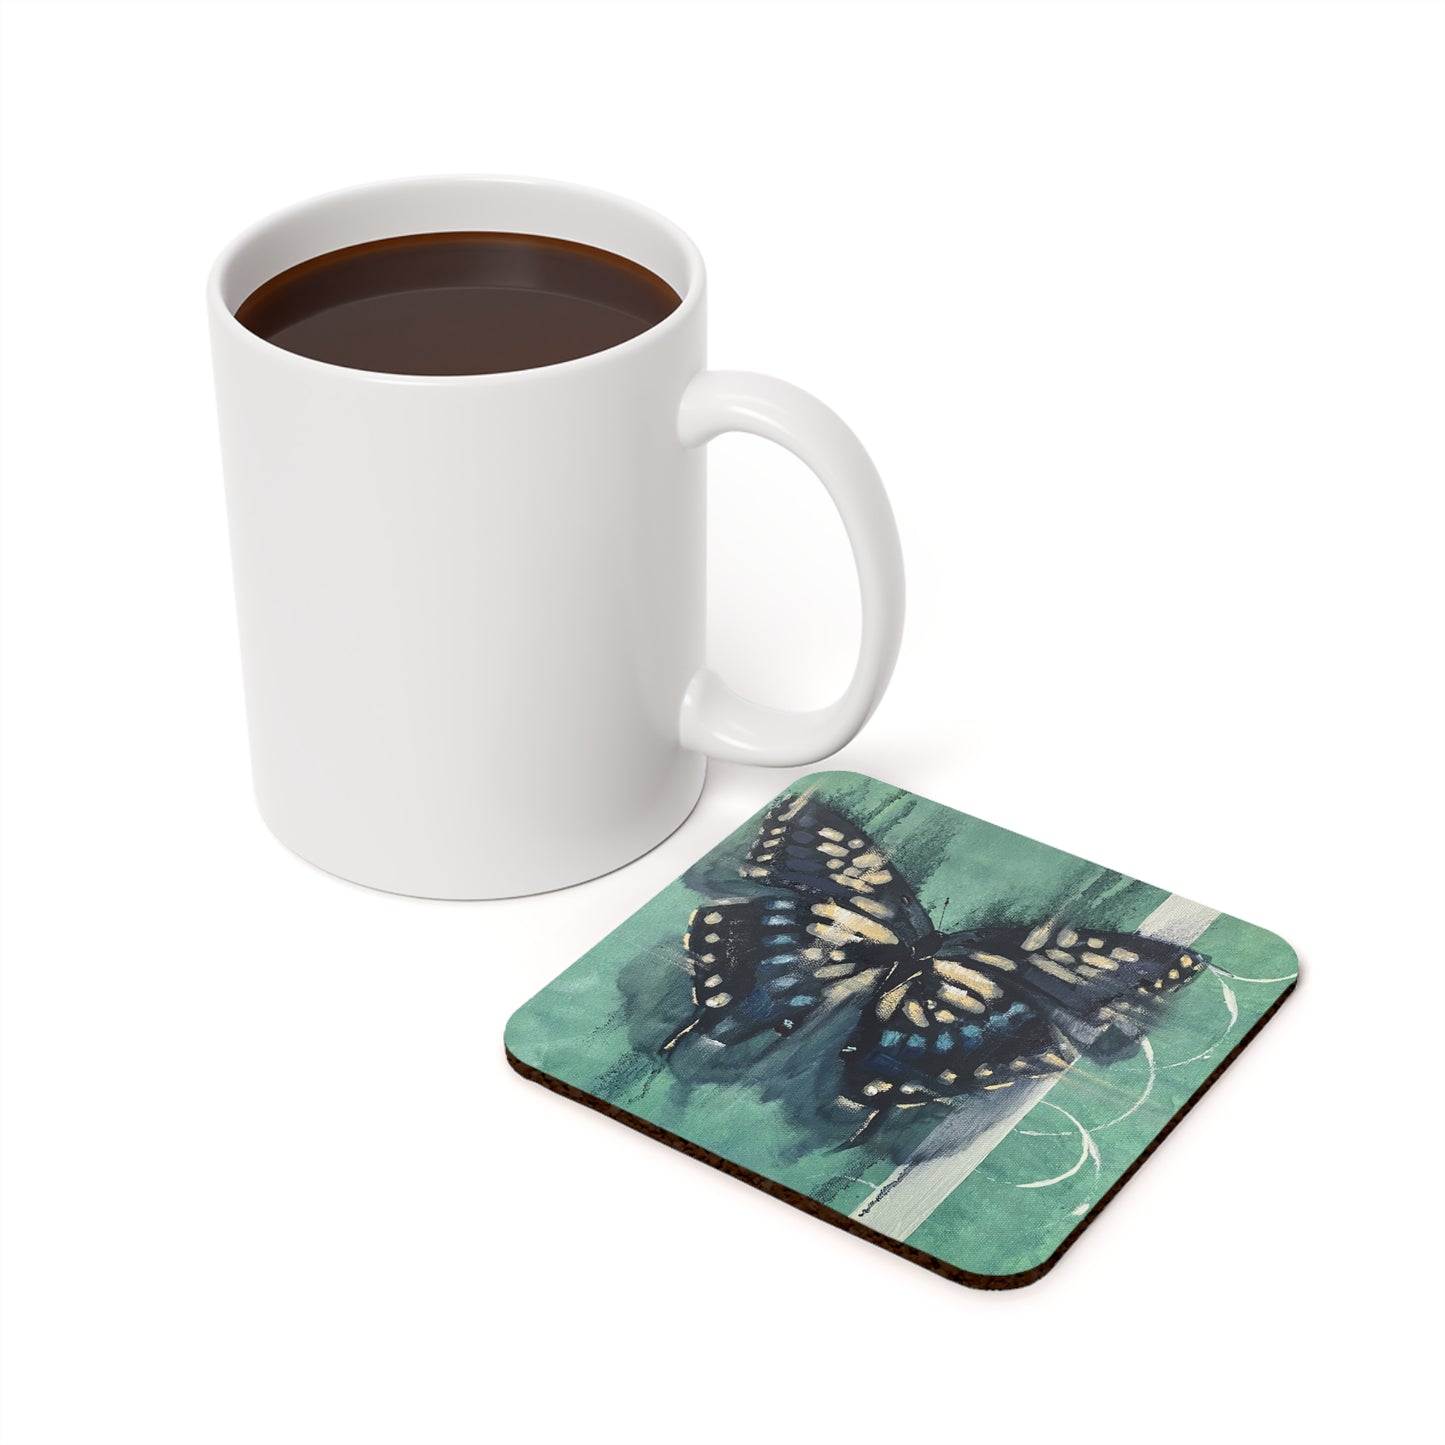 Teal Butterfly Coaster | Kitchen Decor | Drink Accessories